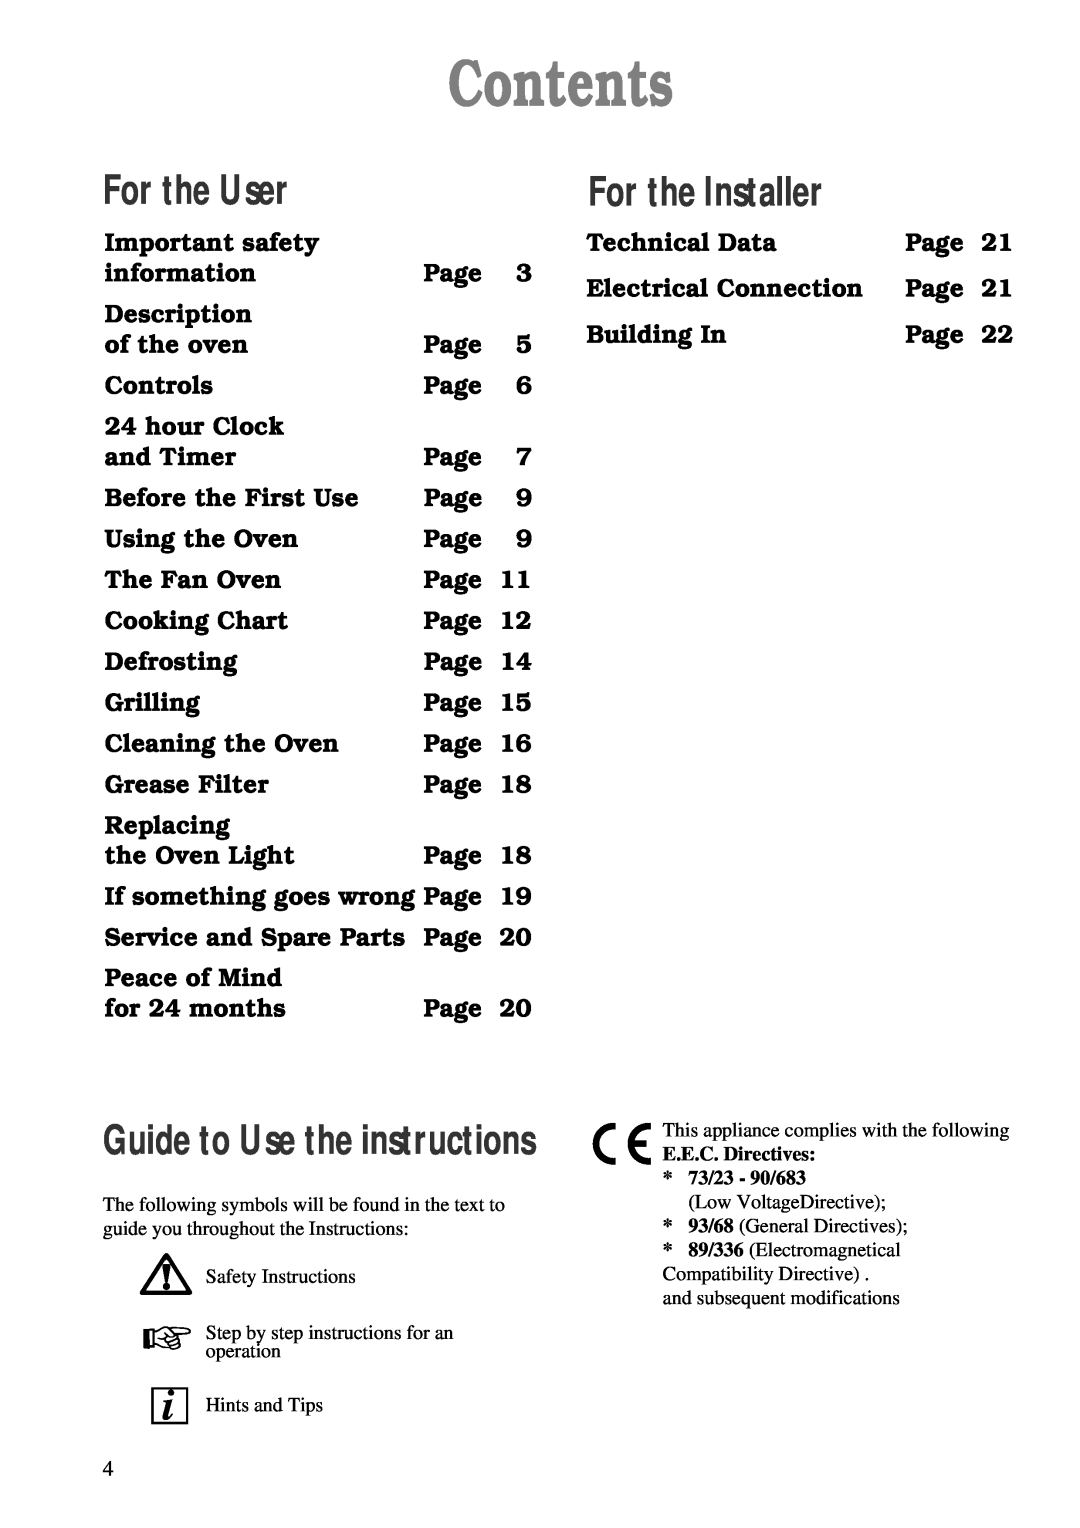 Zanussi ZBF 860 manual Contents, For the User, For the Installer, Guide to Use the instructions 